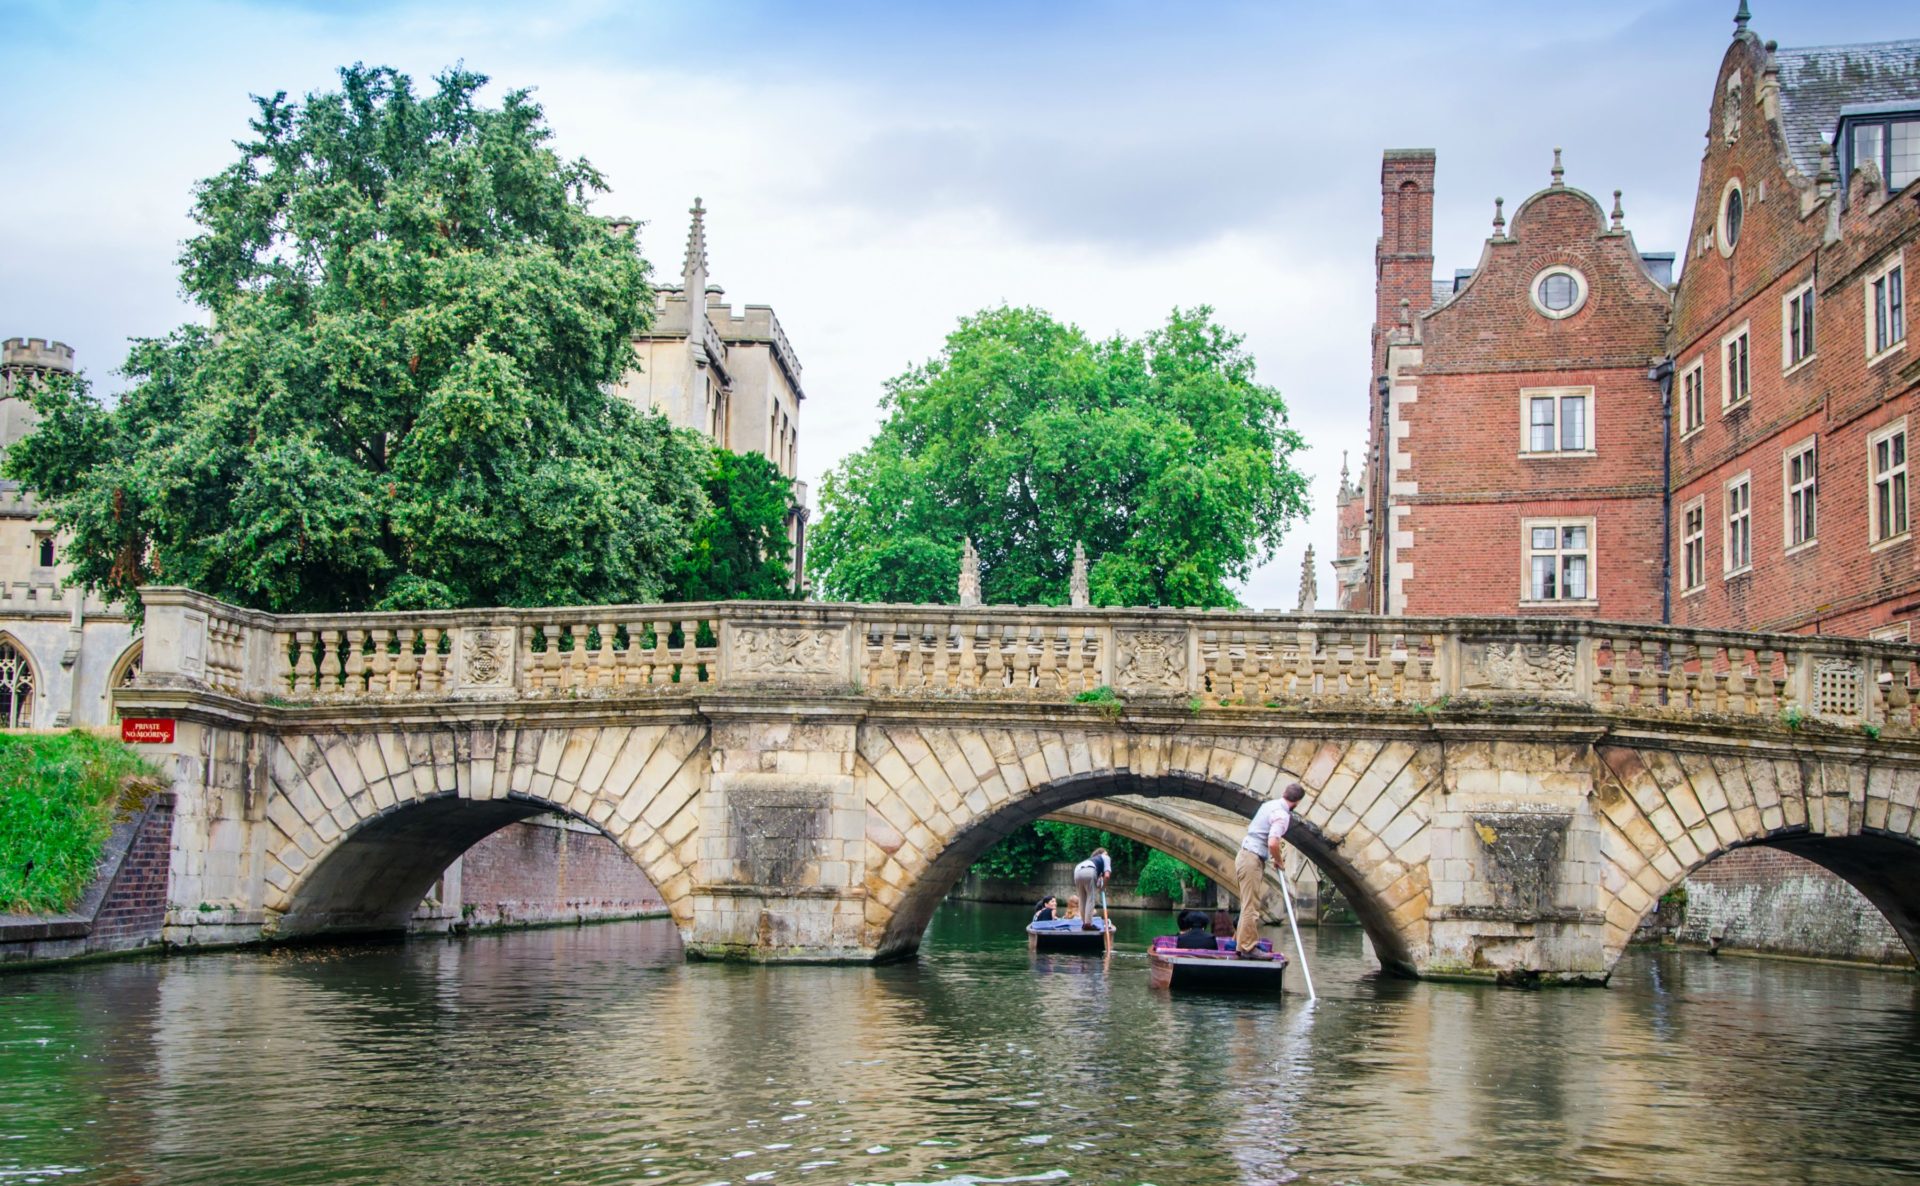 Cambridge, despite its fame for its historic architecture, has become one of the UK's top tech hubs outside London - good news for anyone wondering where to find a tech job in the UK